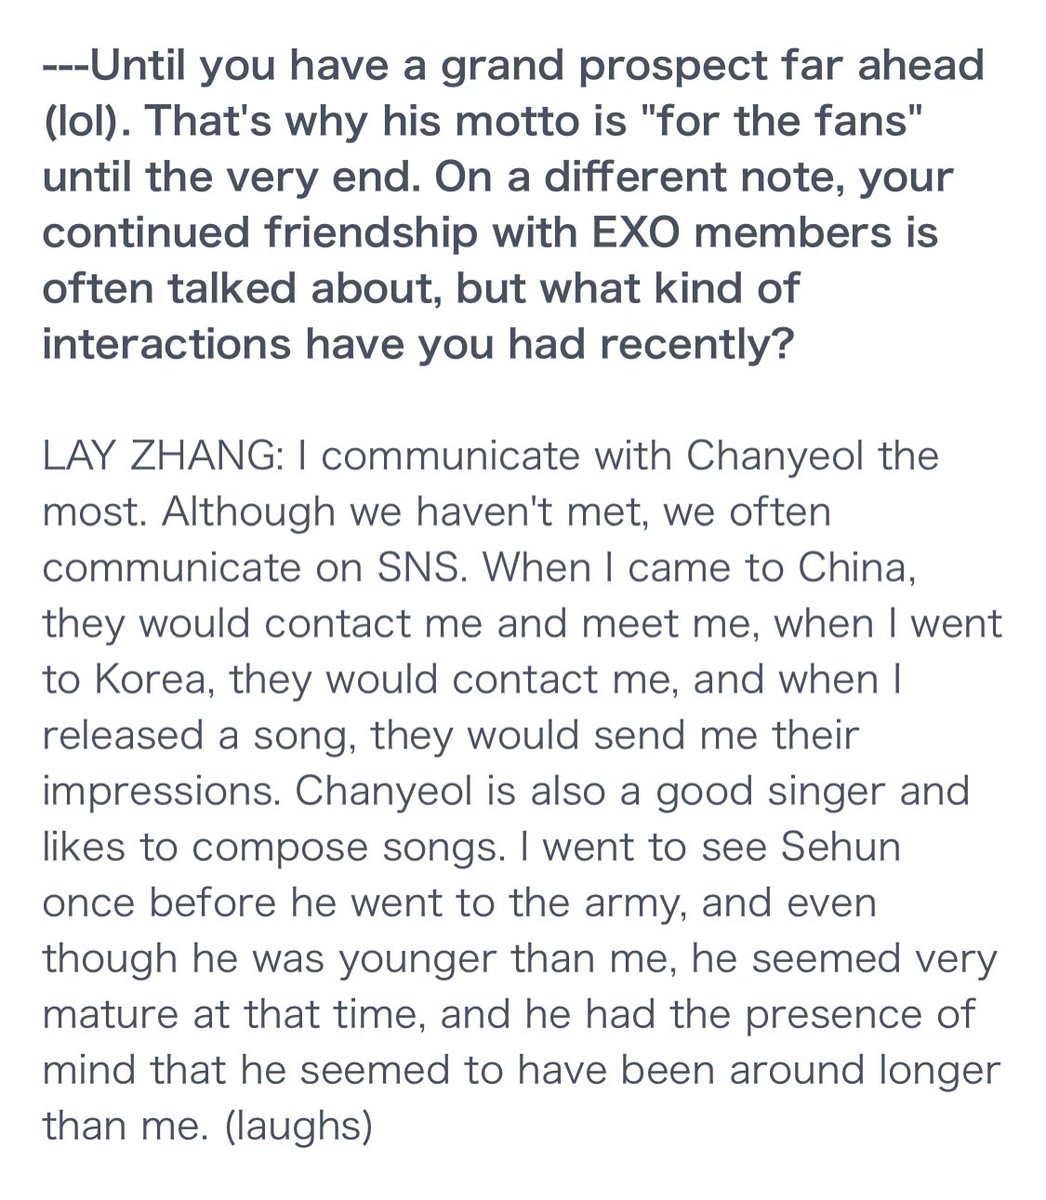 yixing mentioned sehun and chanyeol in a recent interview! he said that he met sehun before he enlisted in the military and talked about how sehun has grown/matured~ ㅠㅠ